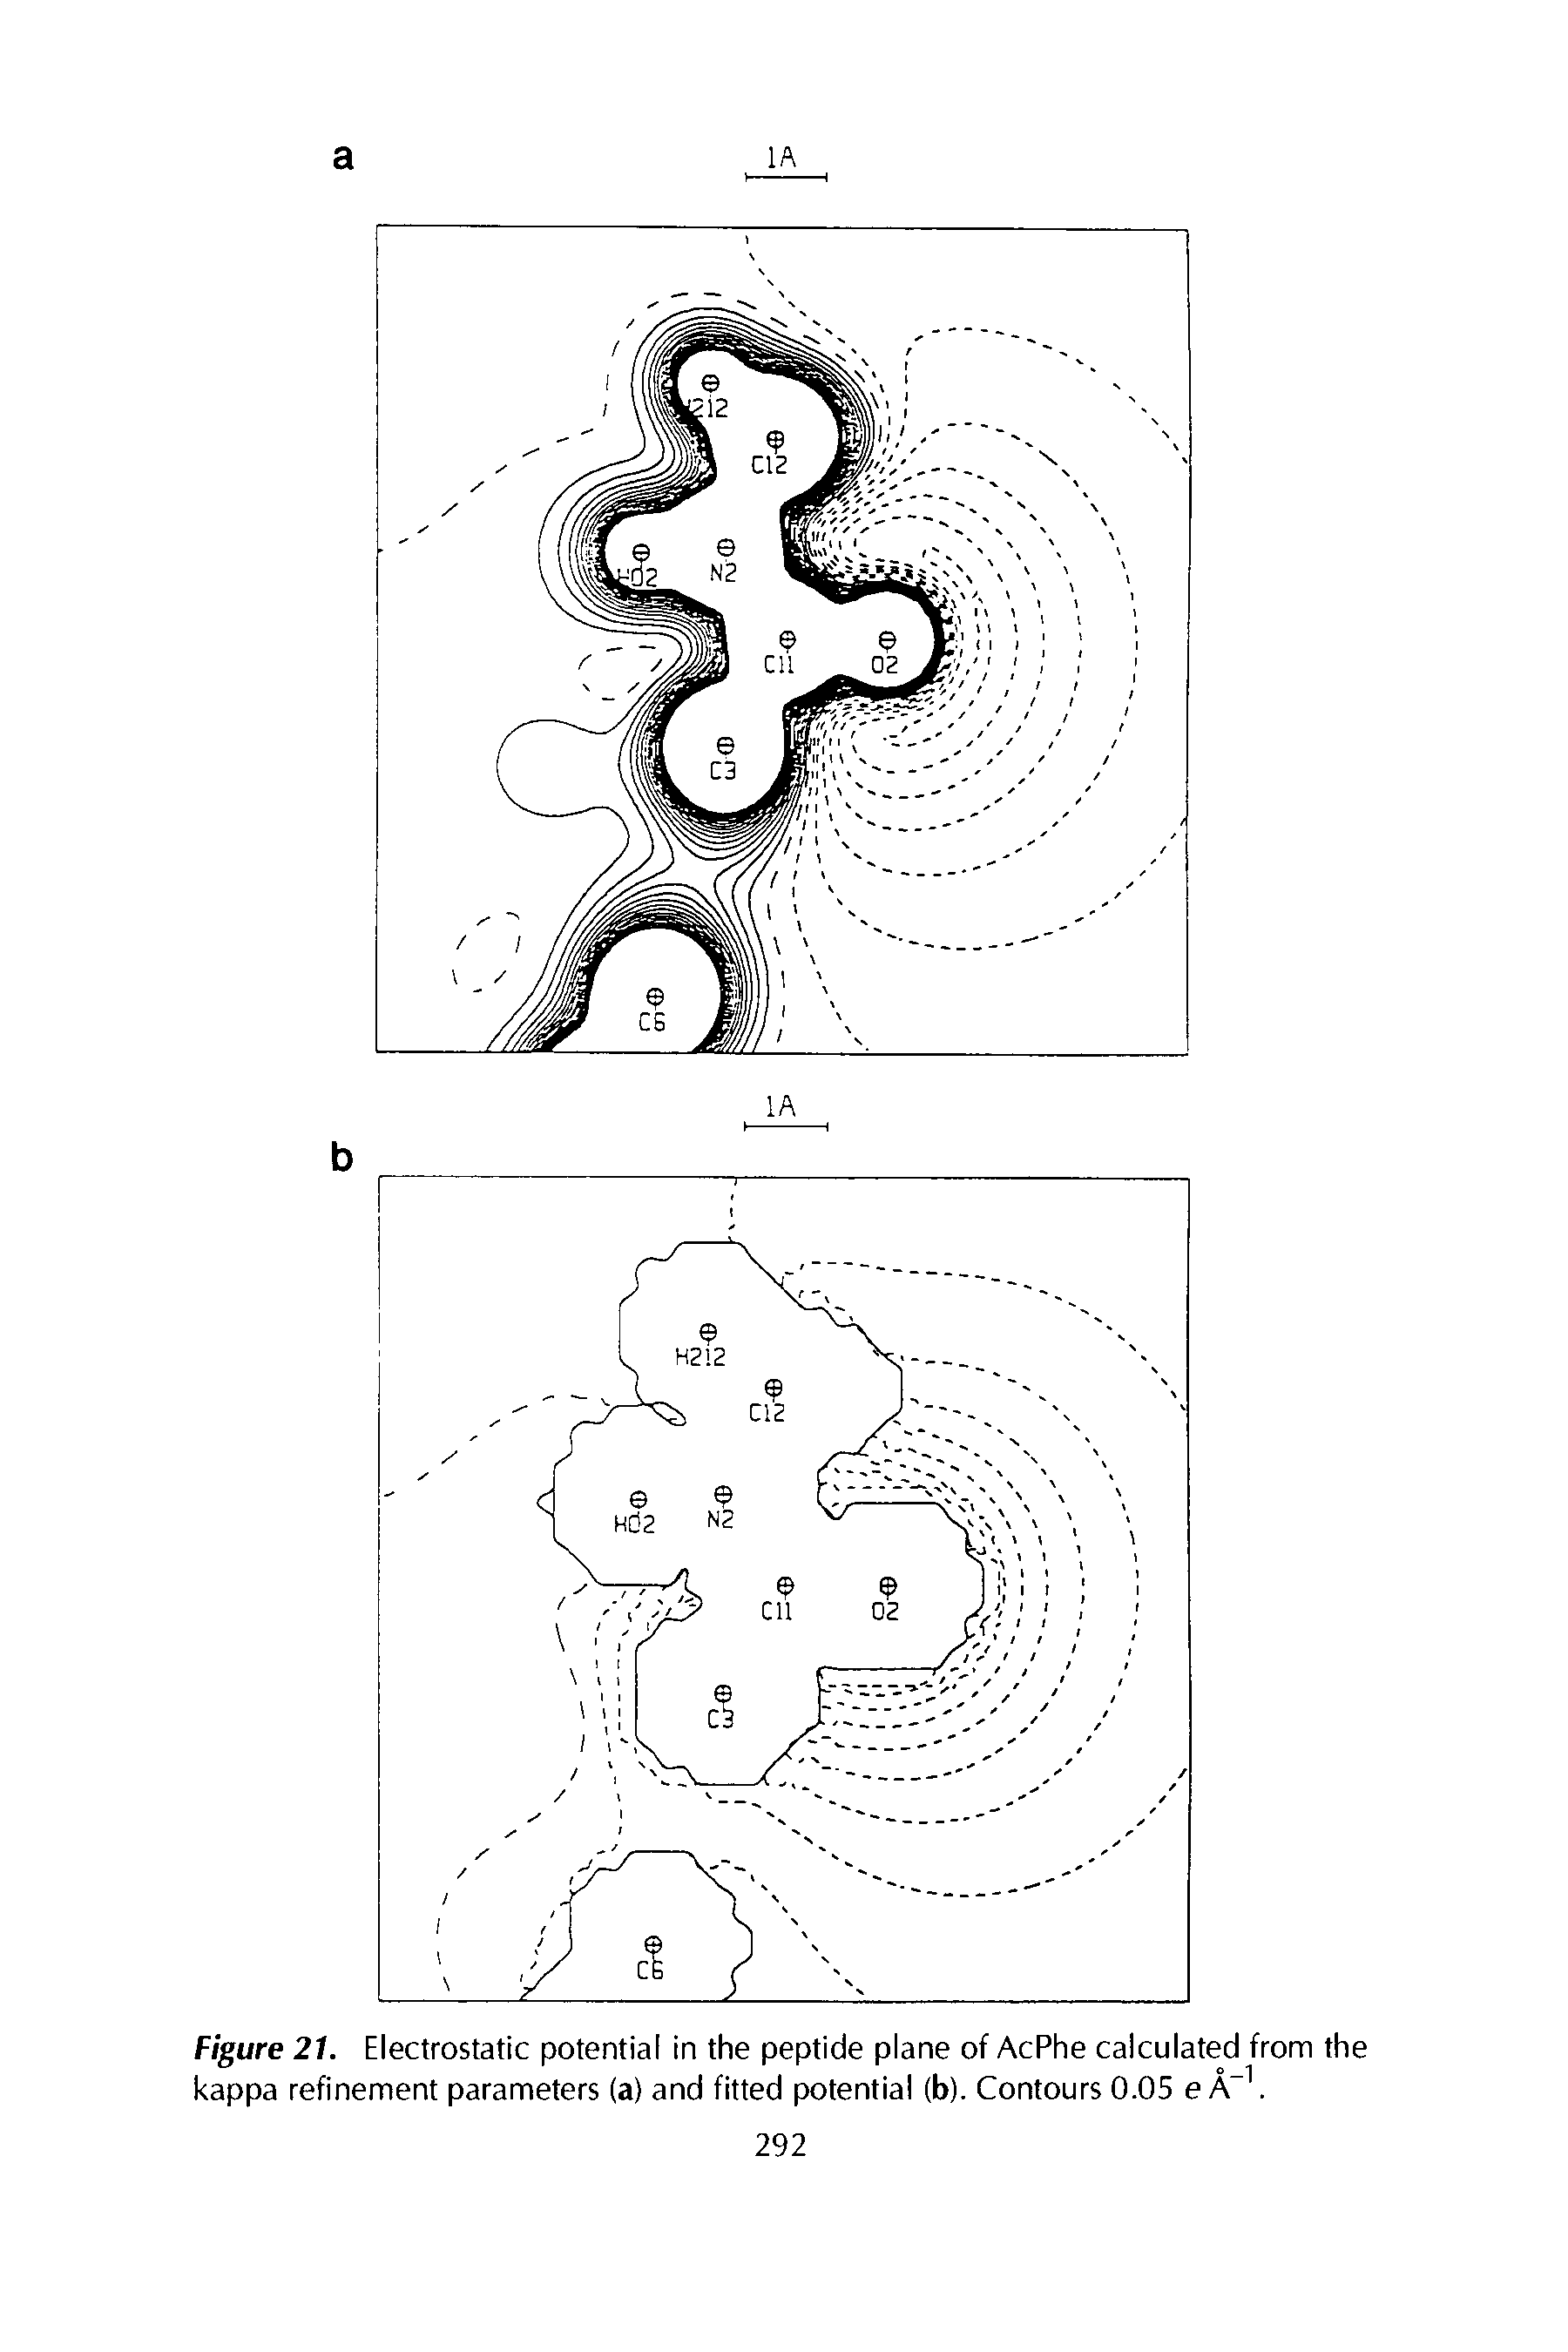 Figure 21. Electrostatic potential in the peptide plane of AcPhe calculated from the kappa refinement parameters (a) and fitted potential (b). Contours 0.05 e A-1.